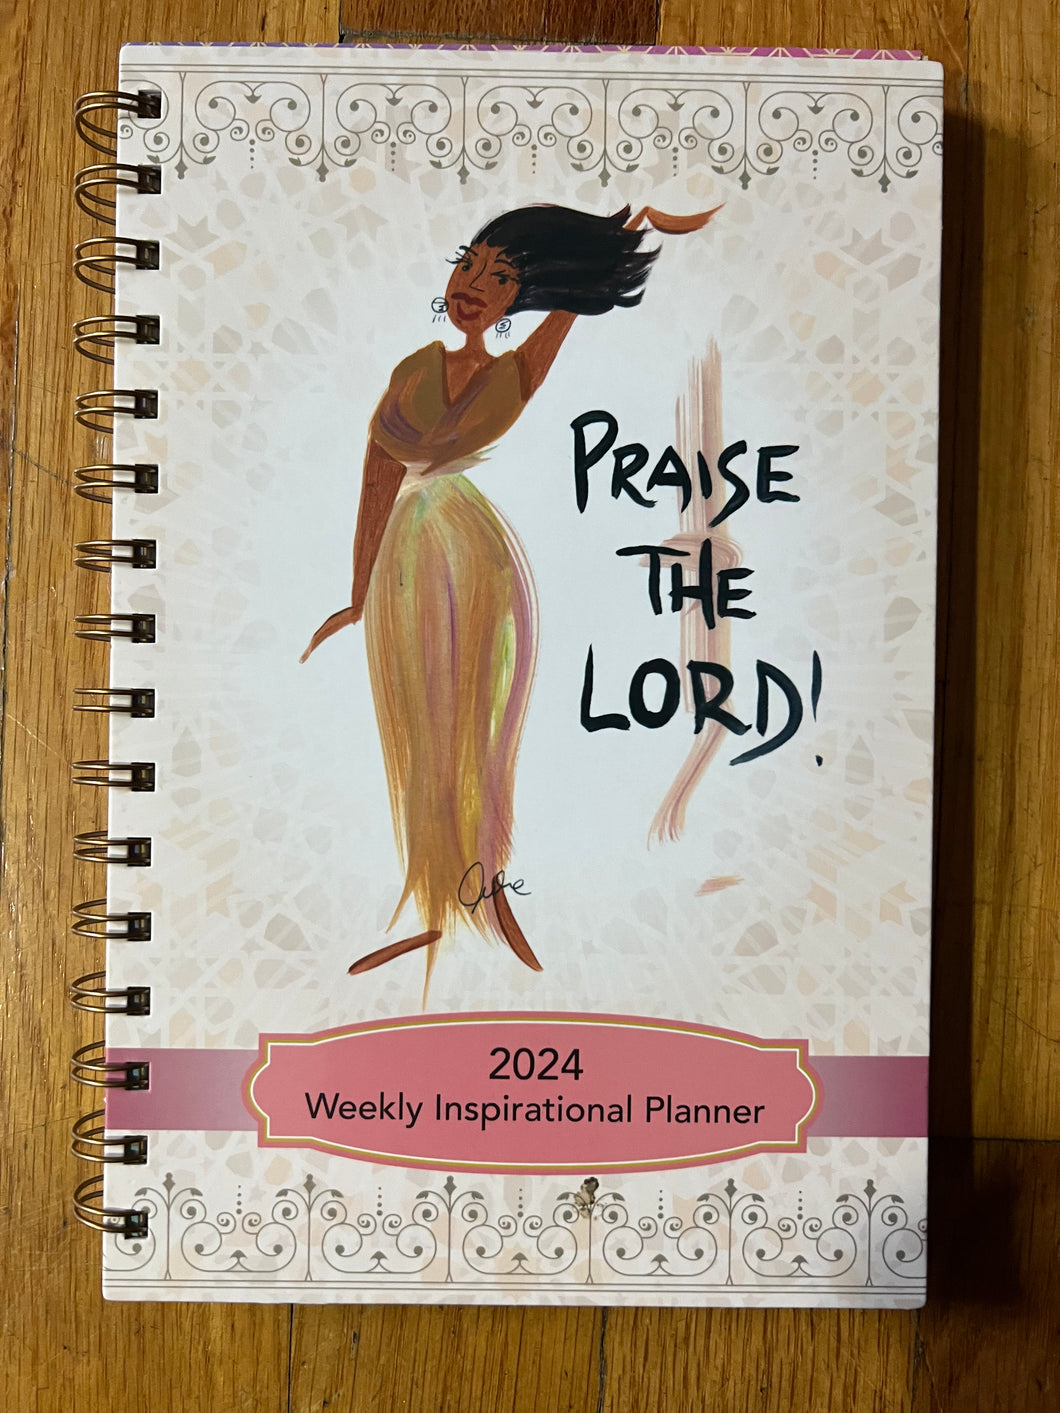 NEW!!! Praise the Lord 2024 Weekly Inspirational Planner